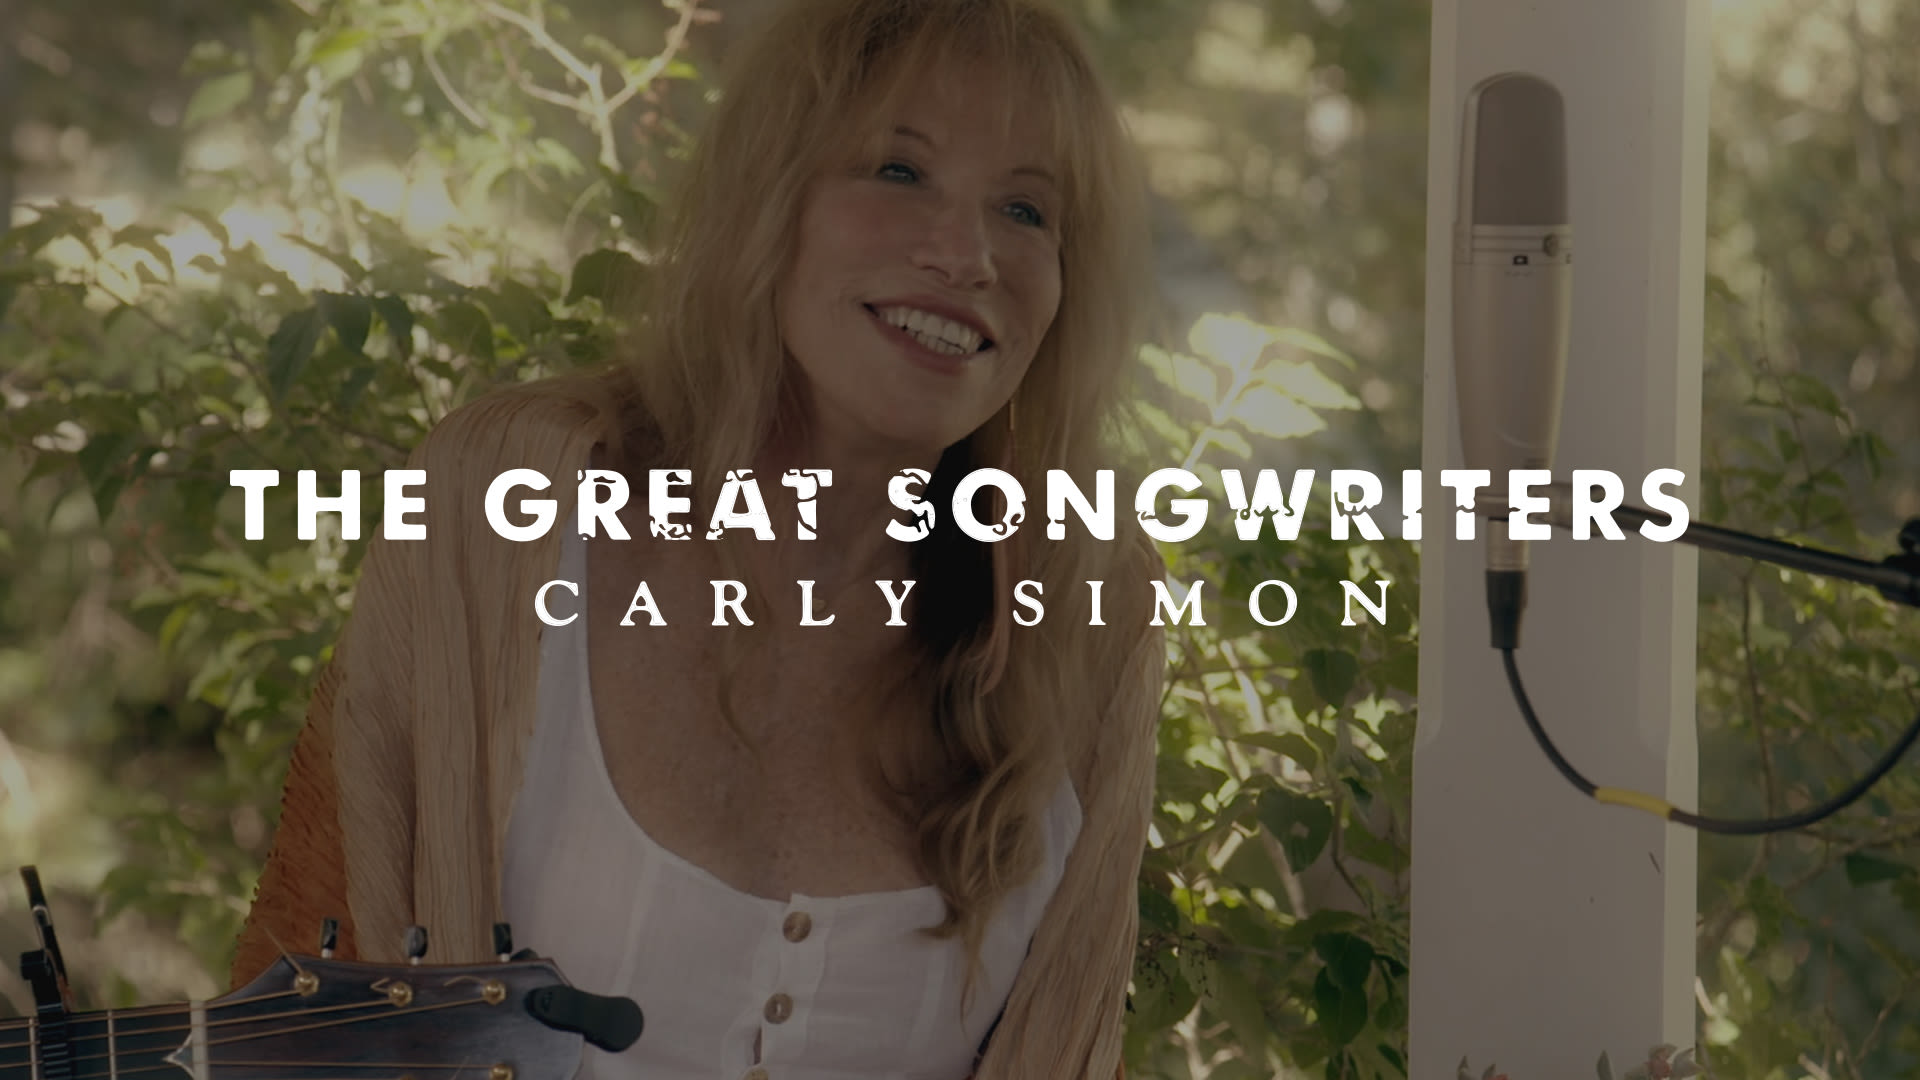 Carly Simon - The Great Songwriters